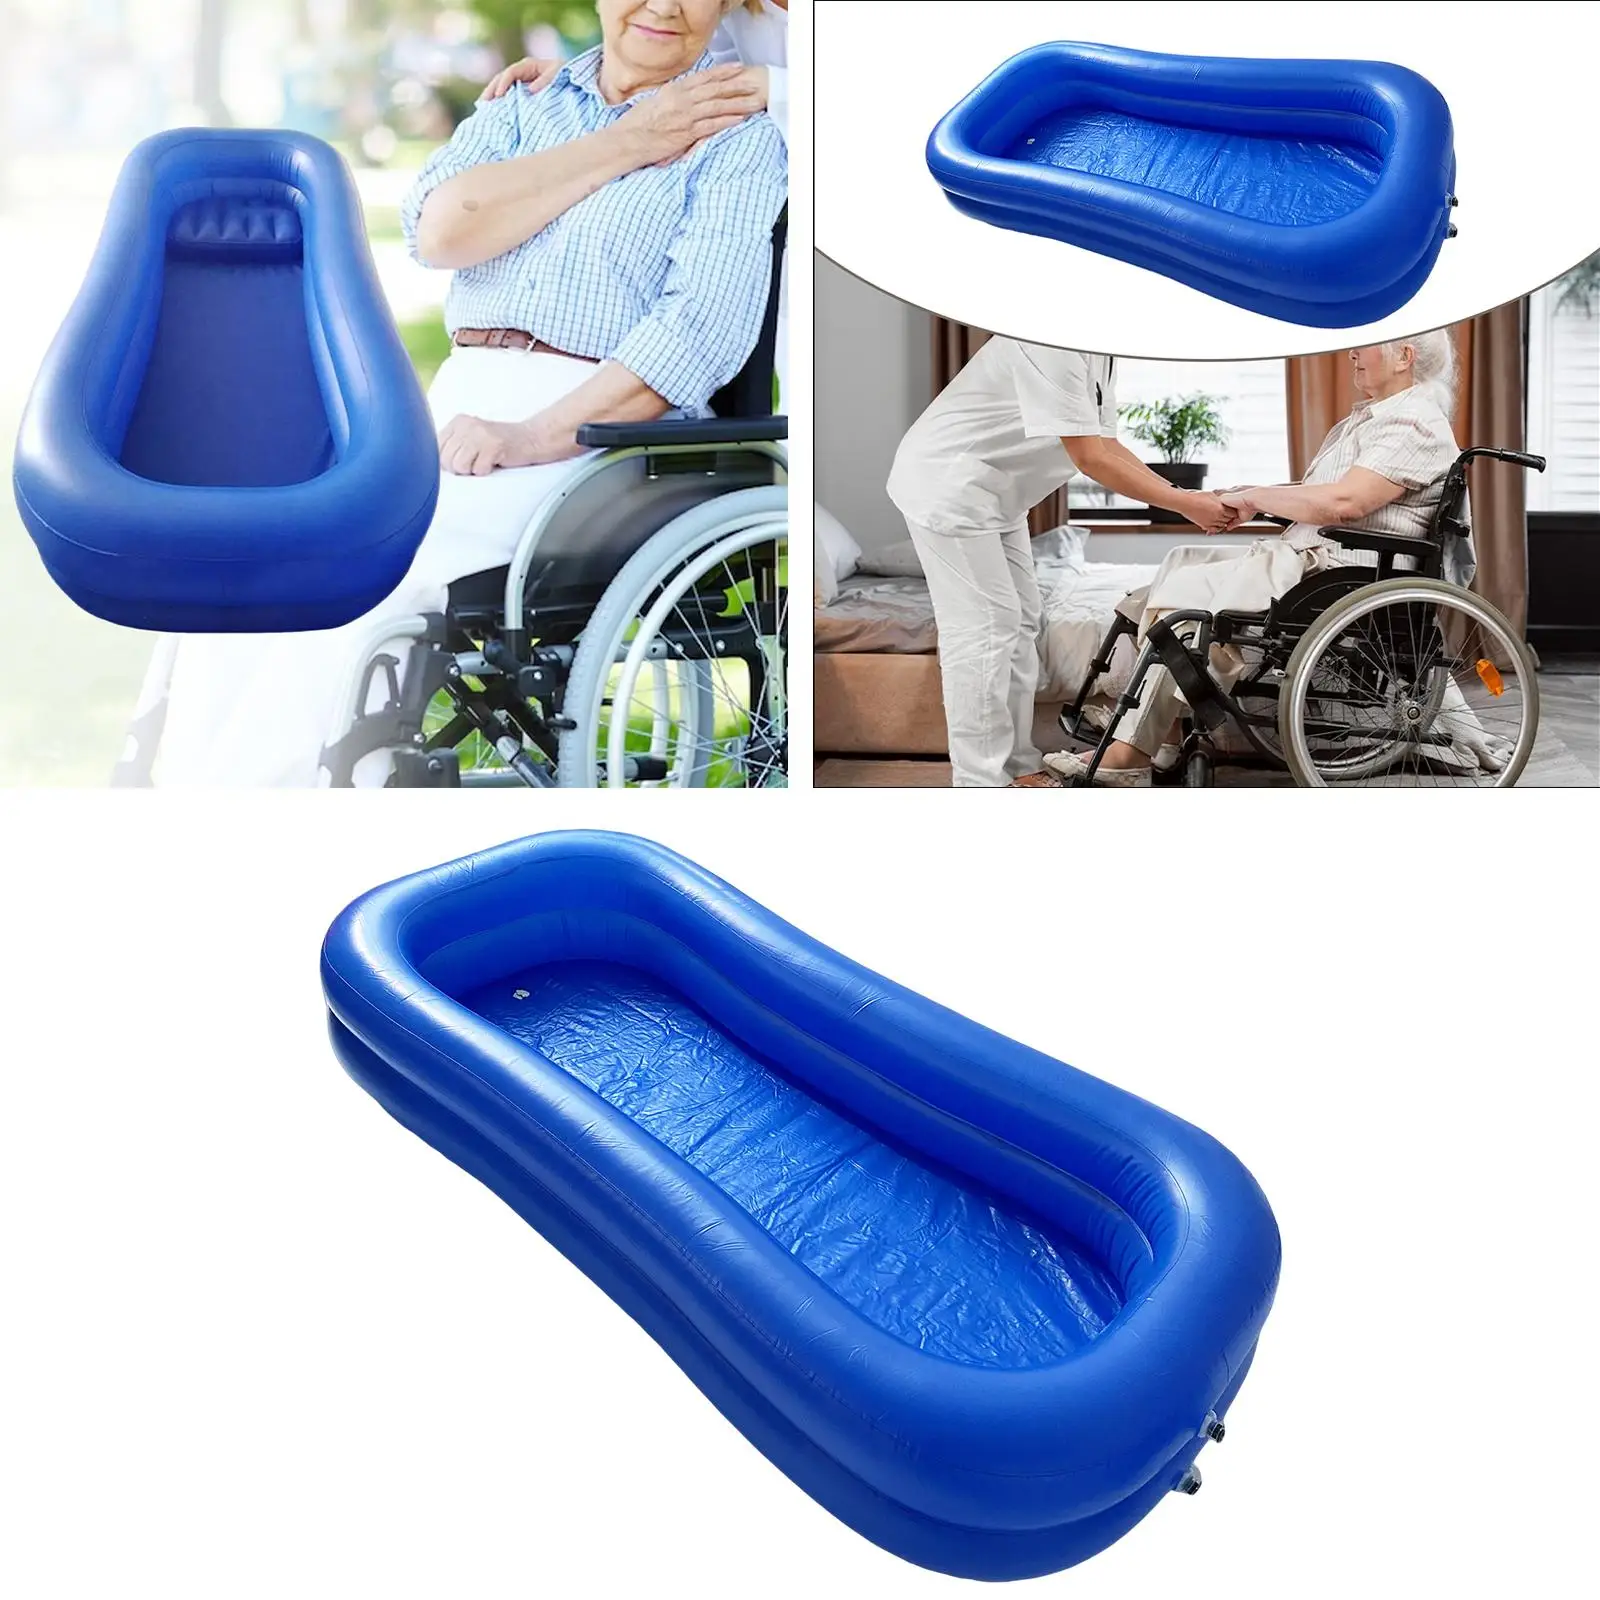 Inflatable Bathtub Foldable Comfortable Bath in Bed Body Washing Basin System for Bedridden Handicapped Disabled Adults Seniors